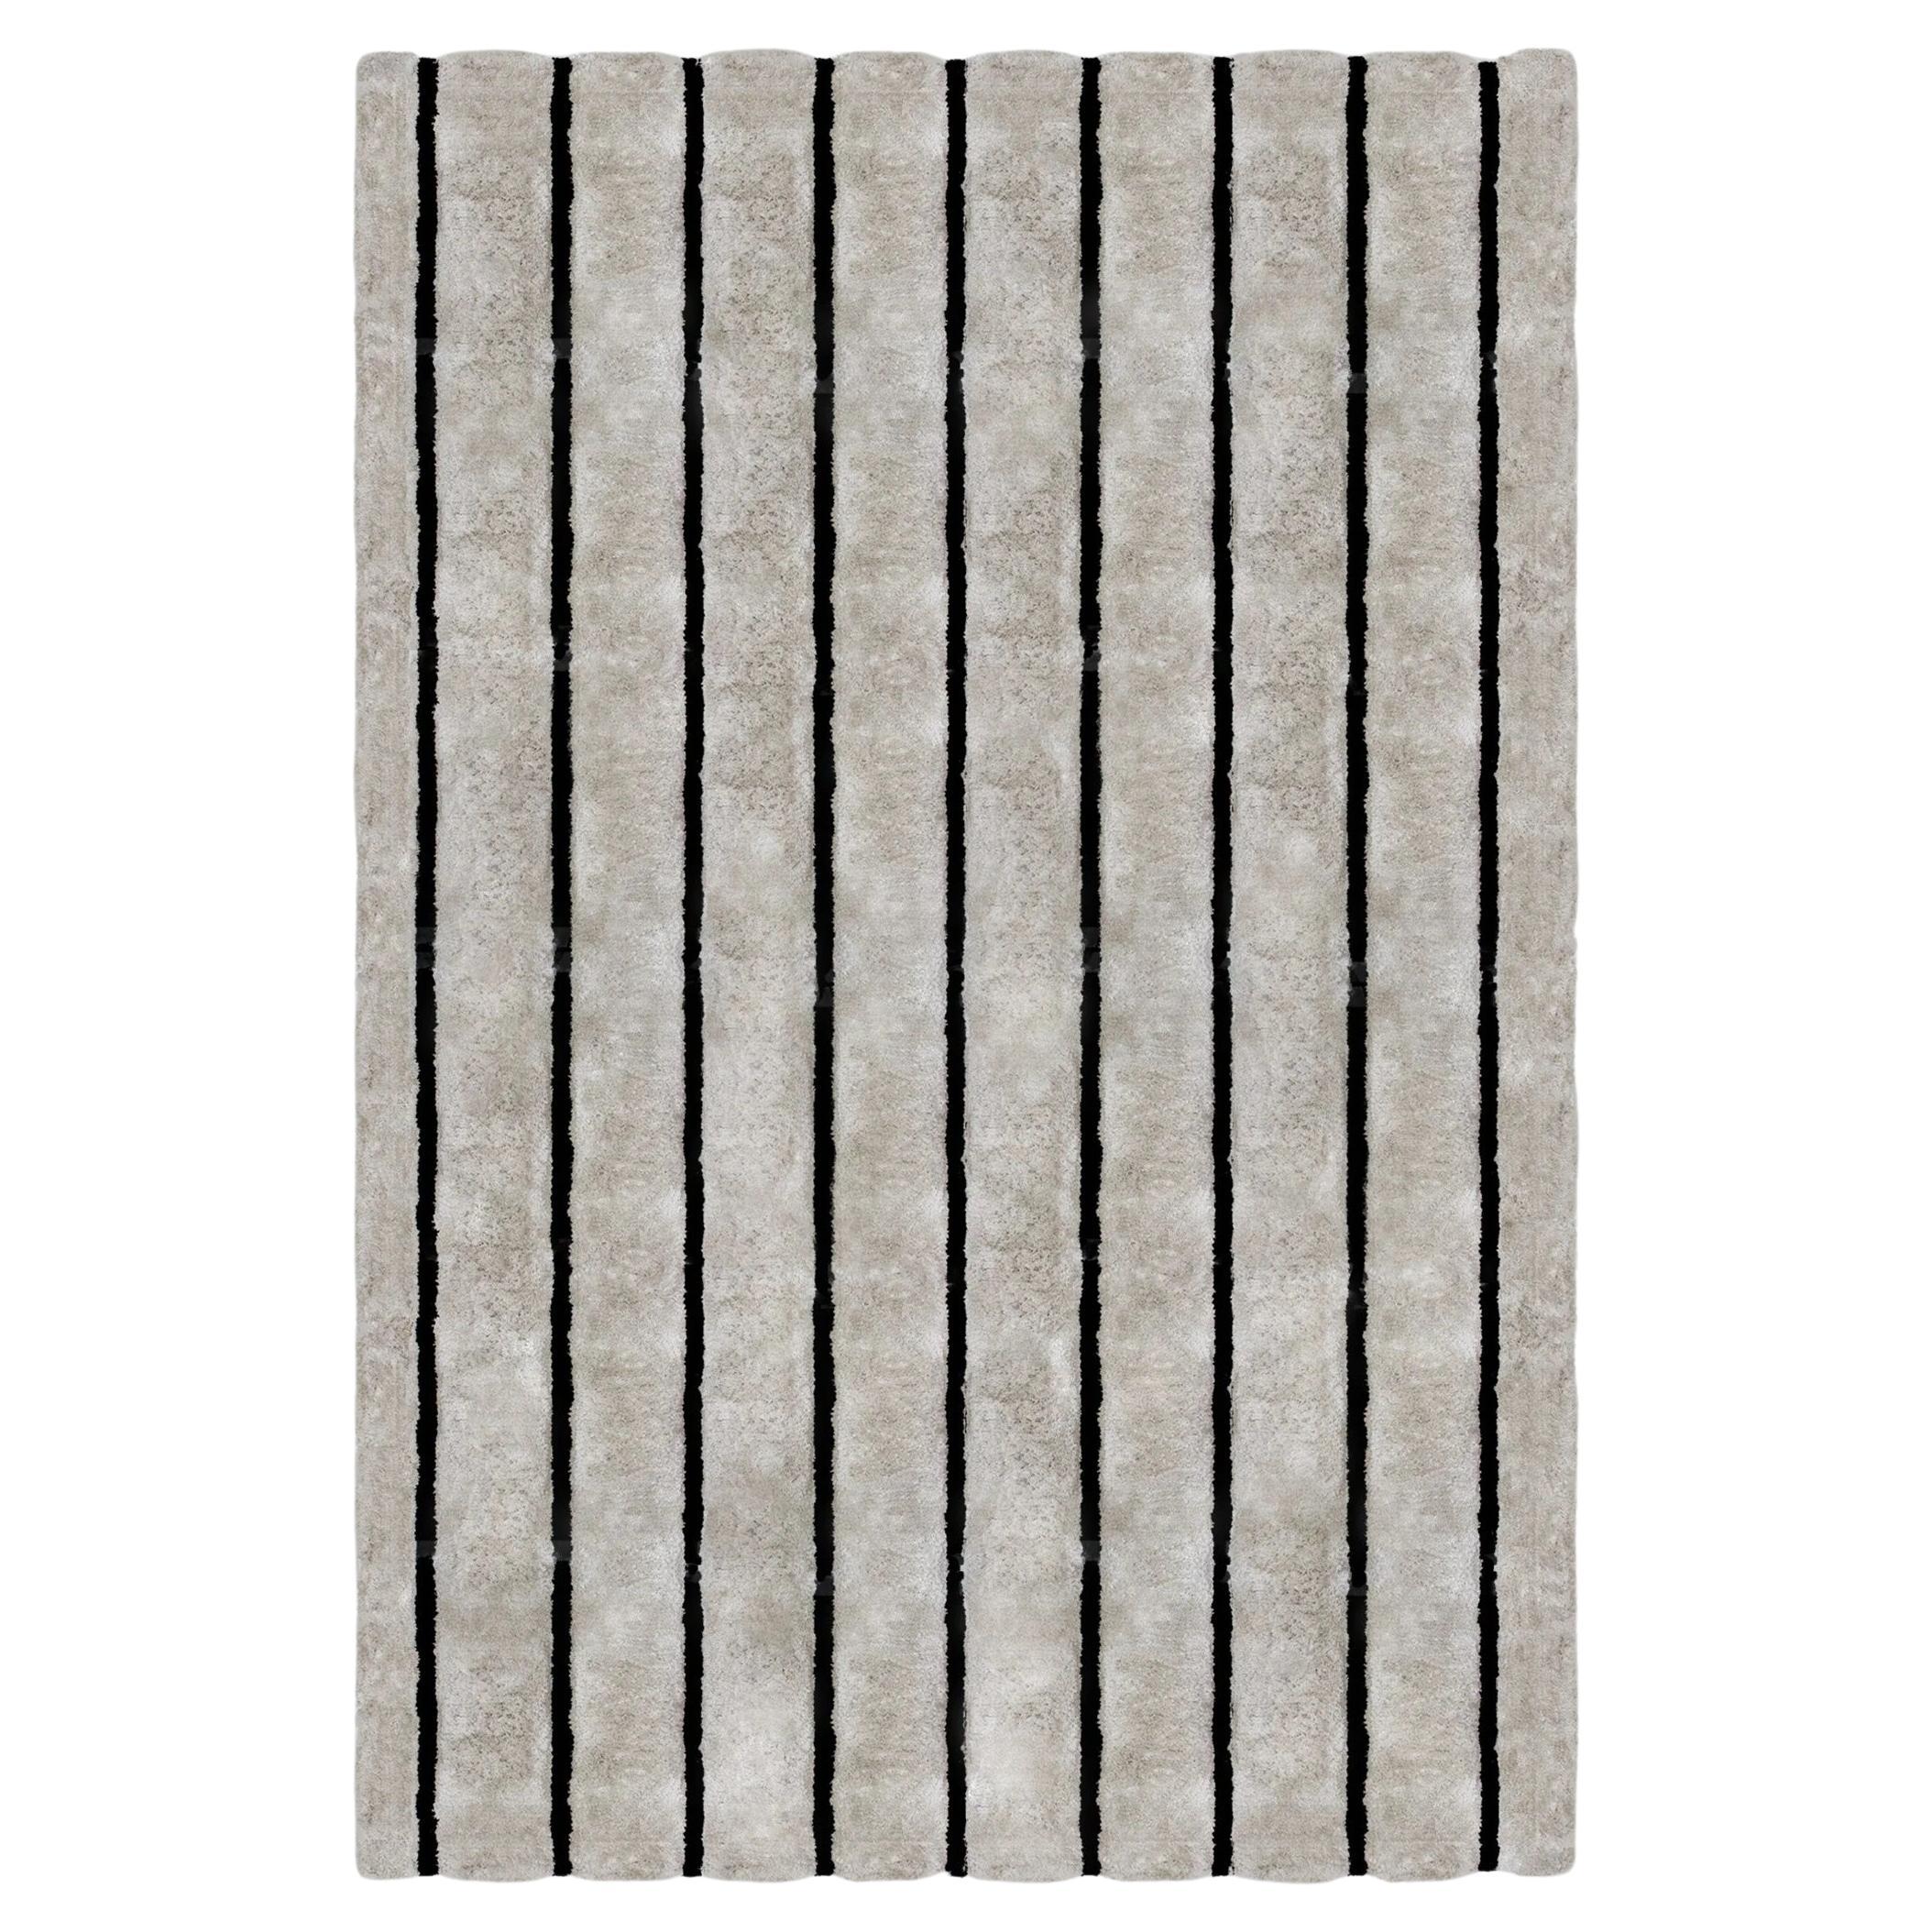 Cream Ever Rug by Paolo Stella